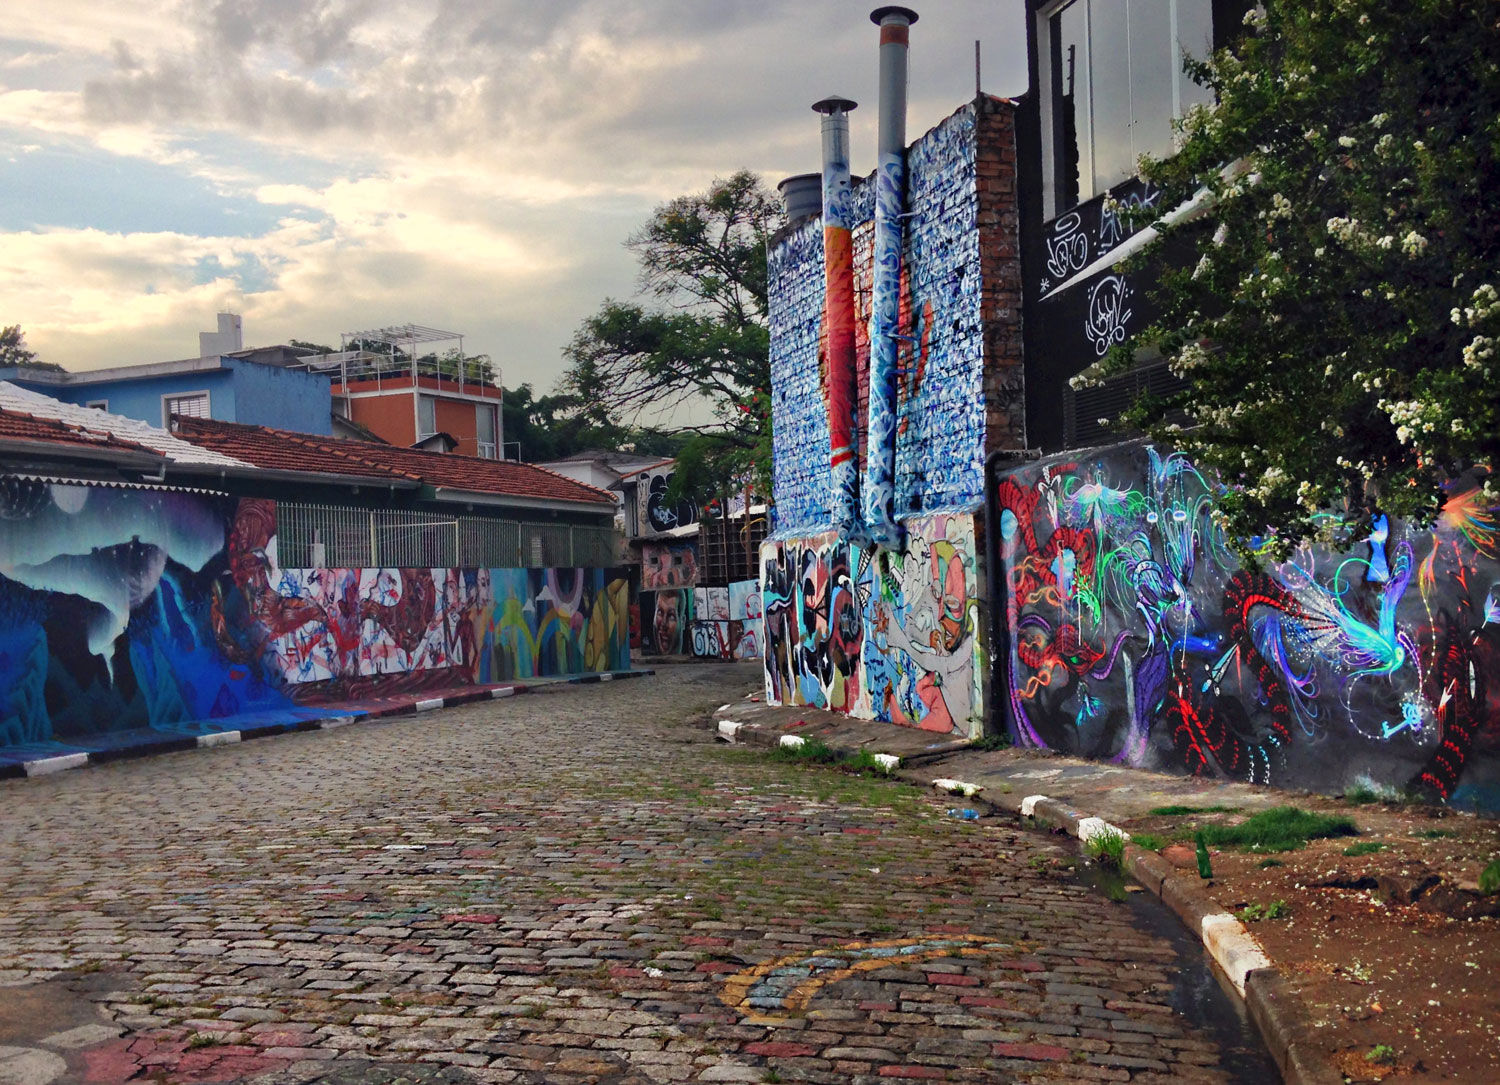 A brightly painted alley in São Paulo's Vila Madalena neighborhood, a hotspot in Brazil for artists, writers, filmmakers and other creative minds.